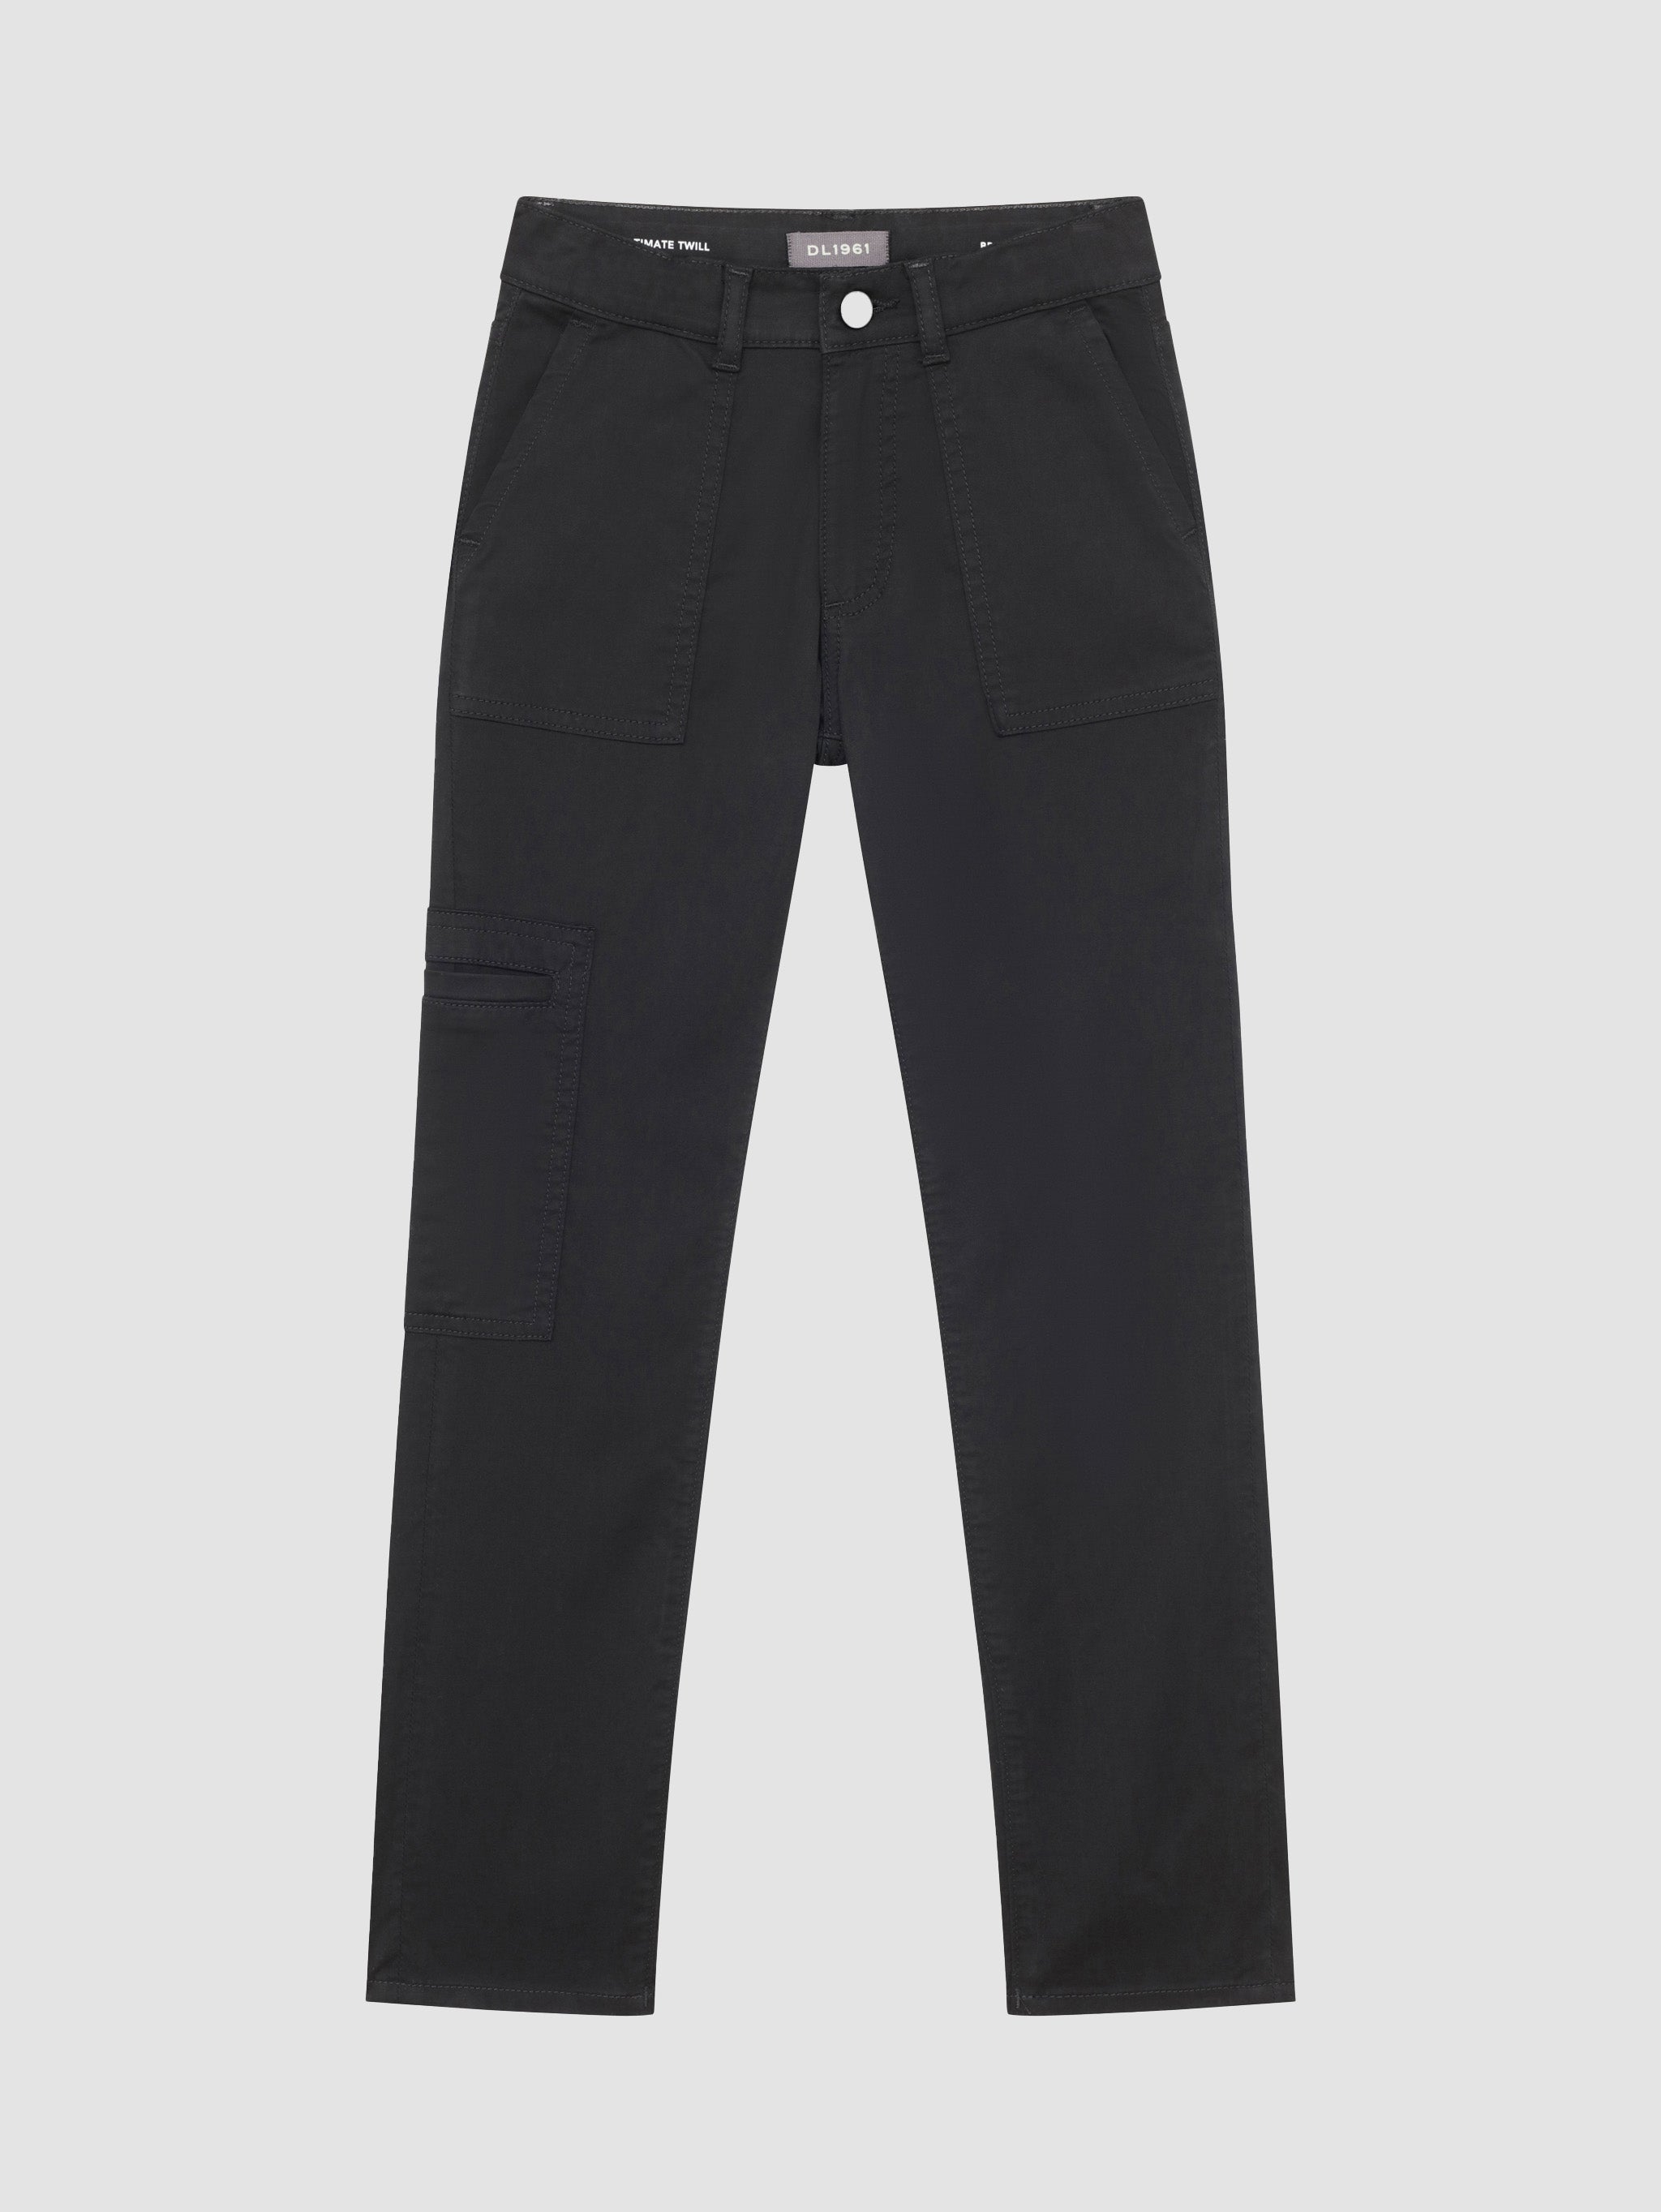 Lilly Black Straight Fit High Waist Cargo Pants – LA CHIC PICK